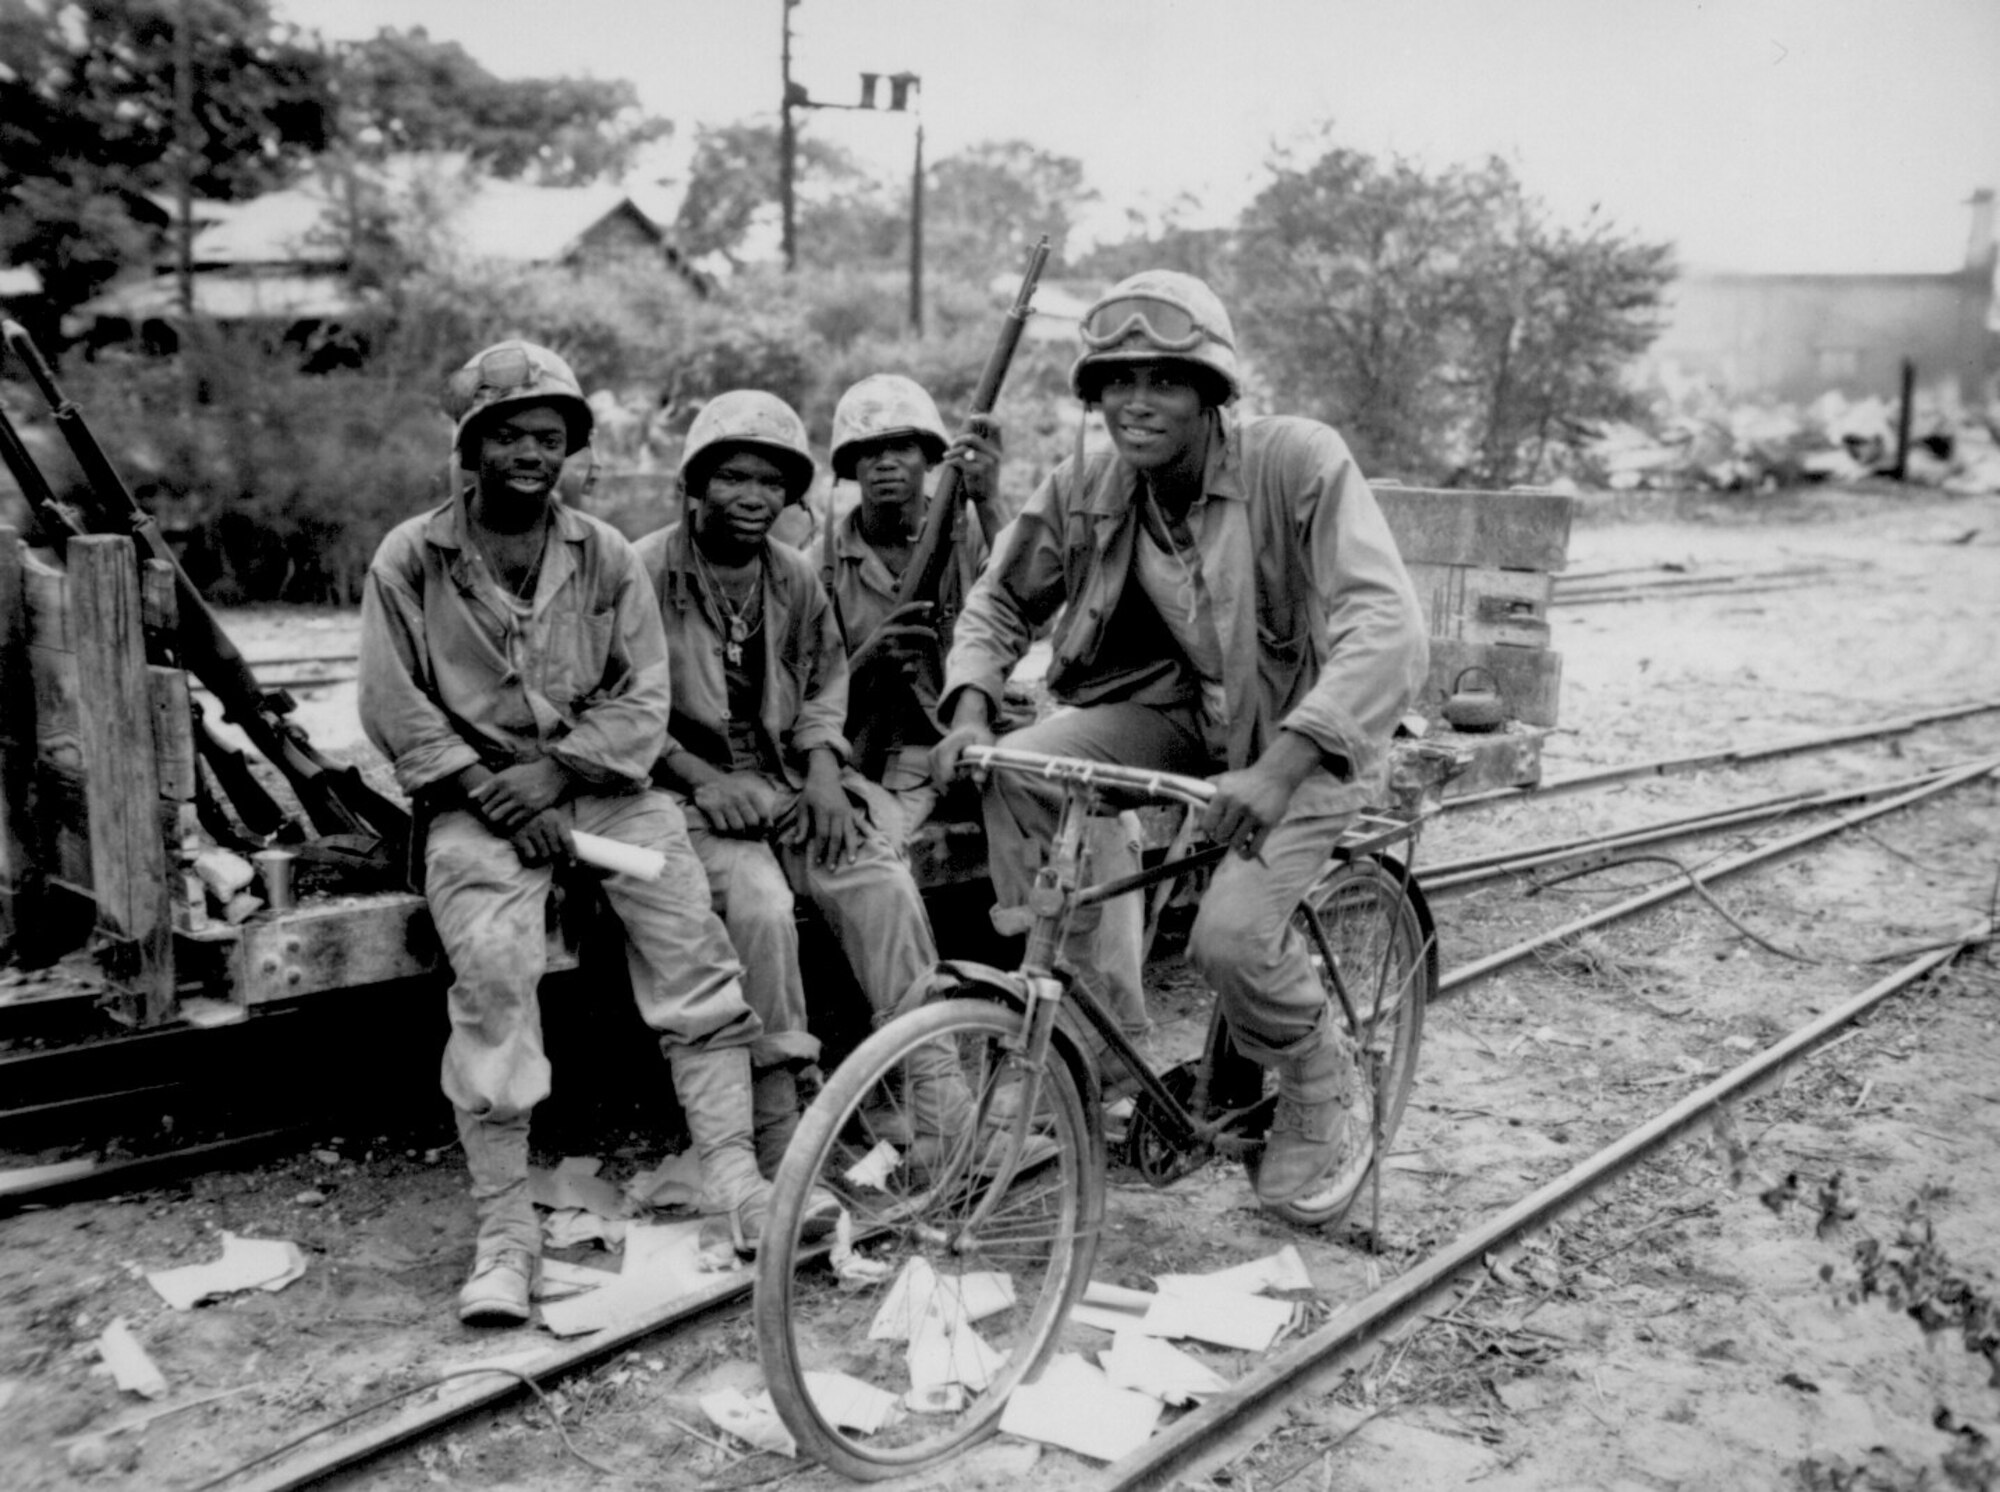 African-American U.S. Marines attached to the 3rd Ammunition Company take a break from supplying the front lines during World War II in Saipan. By the time Camp Montford Point, N.C. closed in 1949, more than 20,000 Marines were trained within its walls. (Courtesy photo/Released)